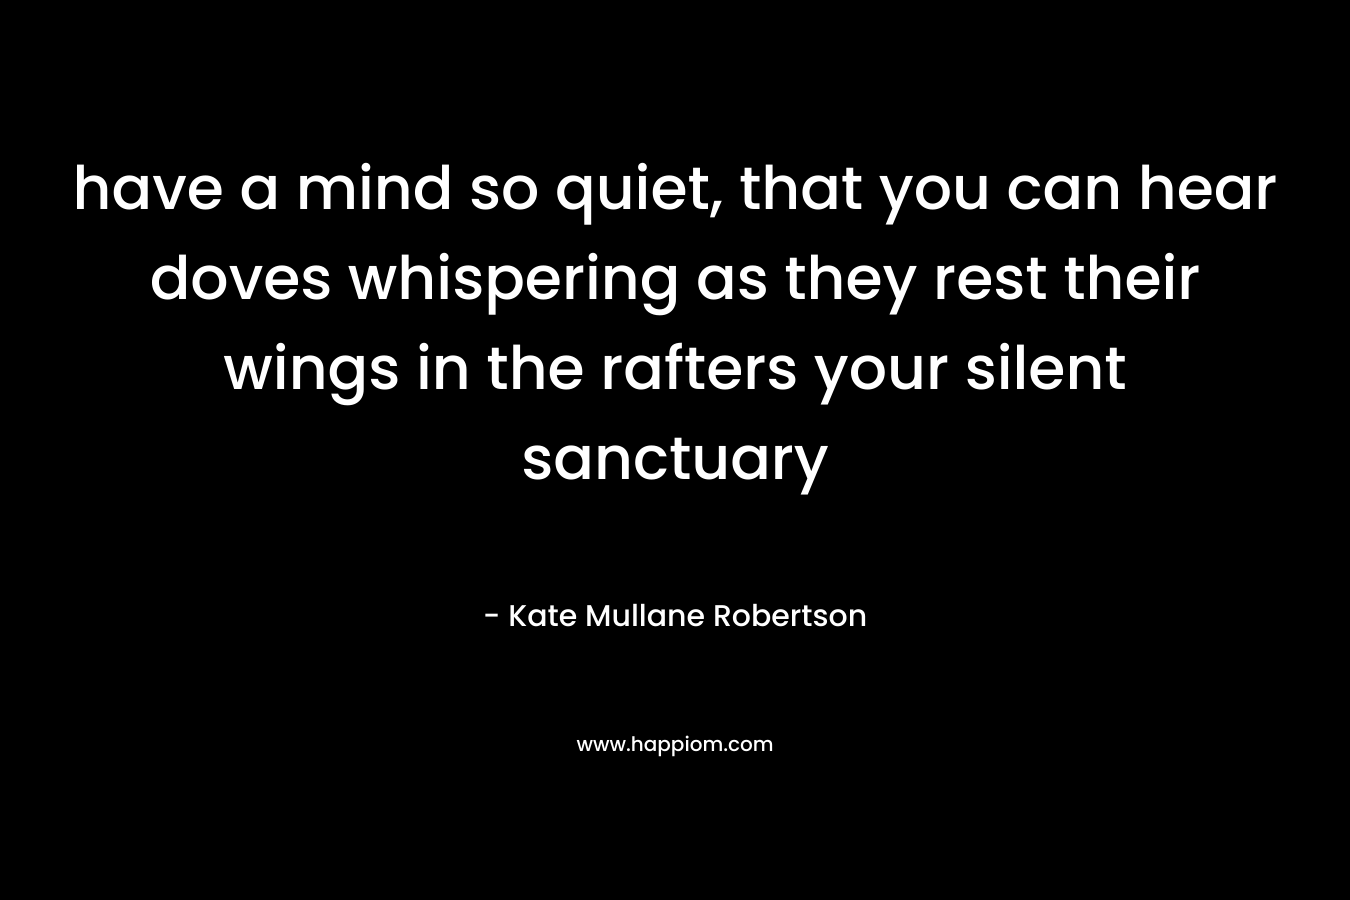 have a mind so quiet, that you can hear doves whispering as they rest their wings in the rafters your silent sanctuary – Kate Mullane Robertson